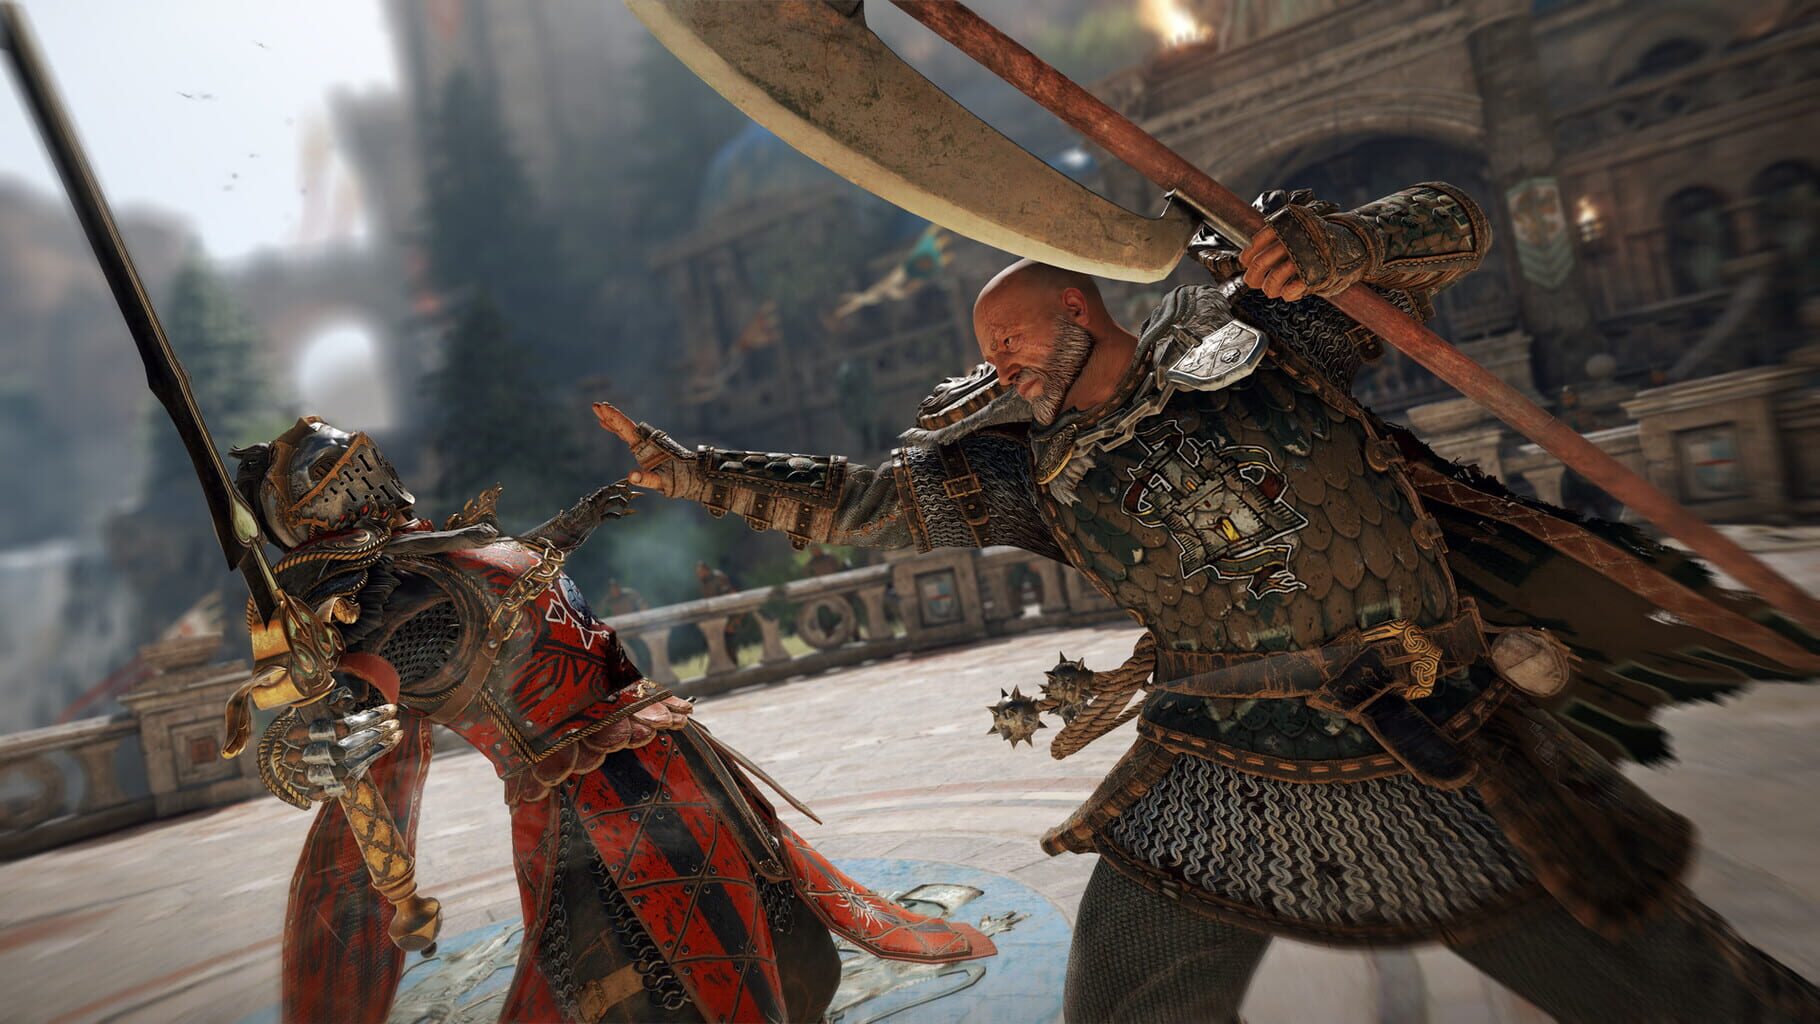 For Honor: Gryphon Hero Image